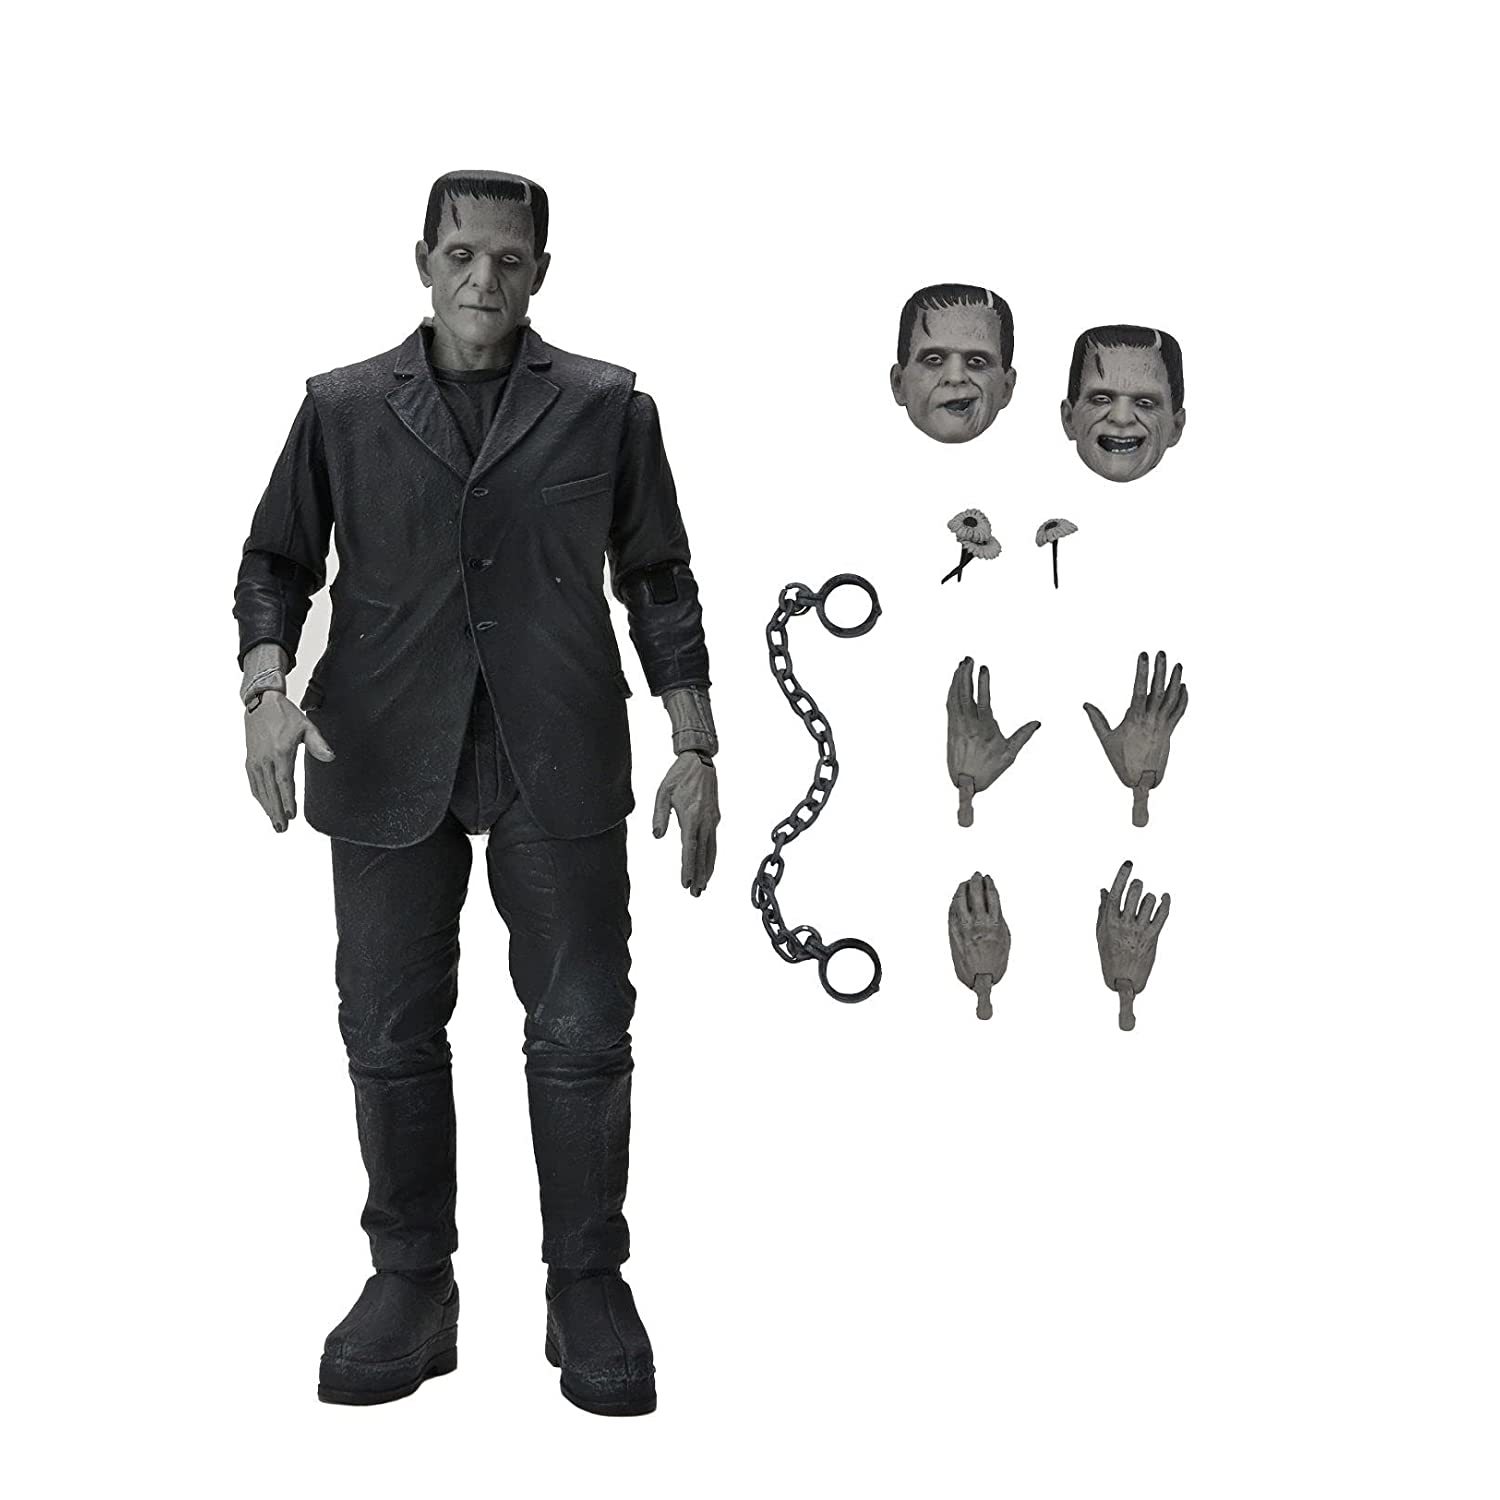 Primary image for Universal Monsters NECA Frankenstein Action Figure [Ultimate Version, Black & Wh